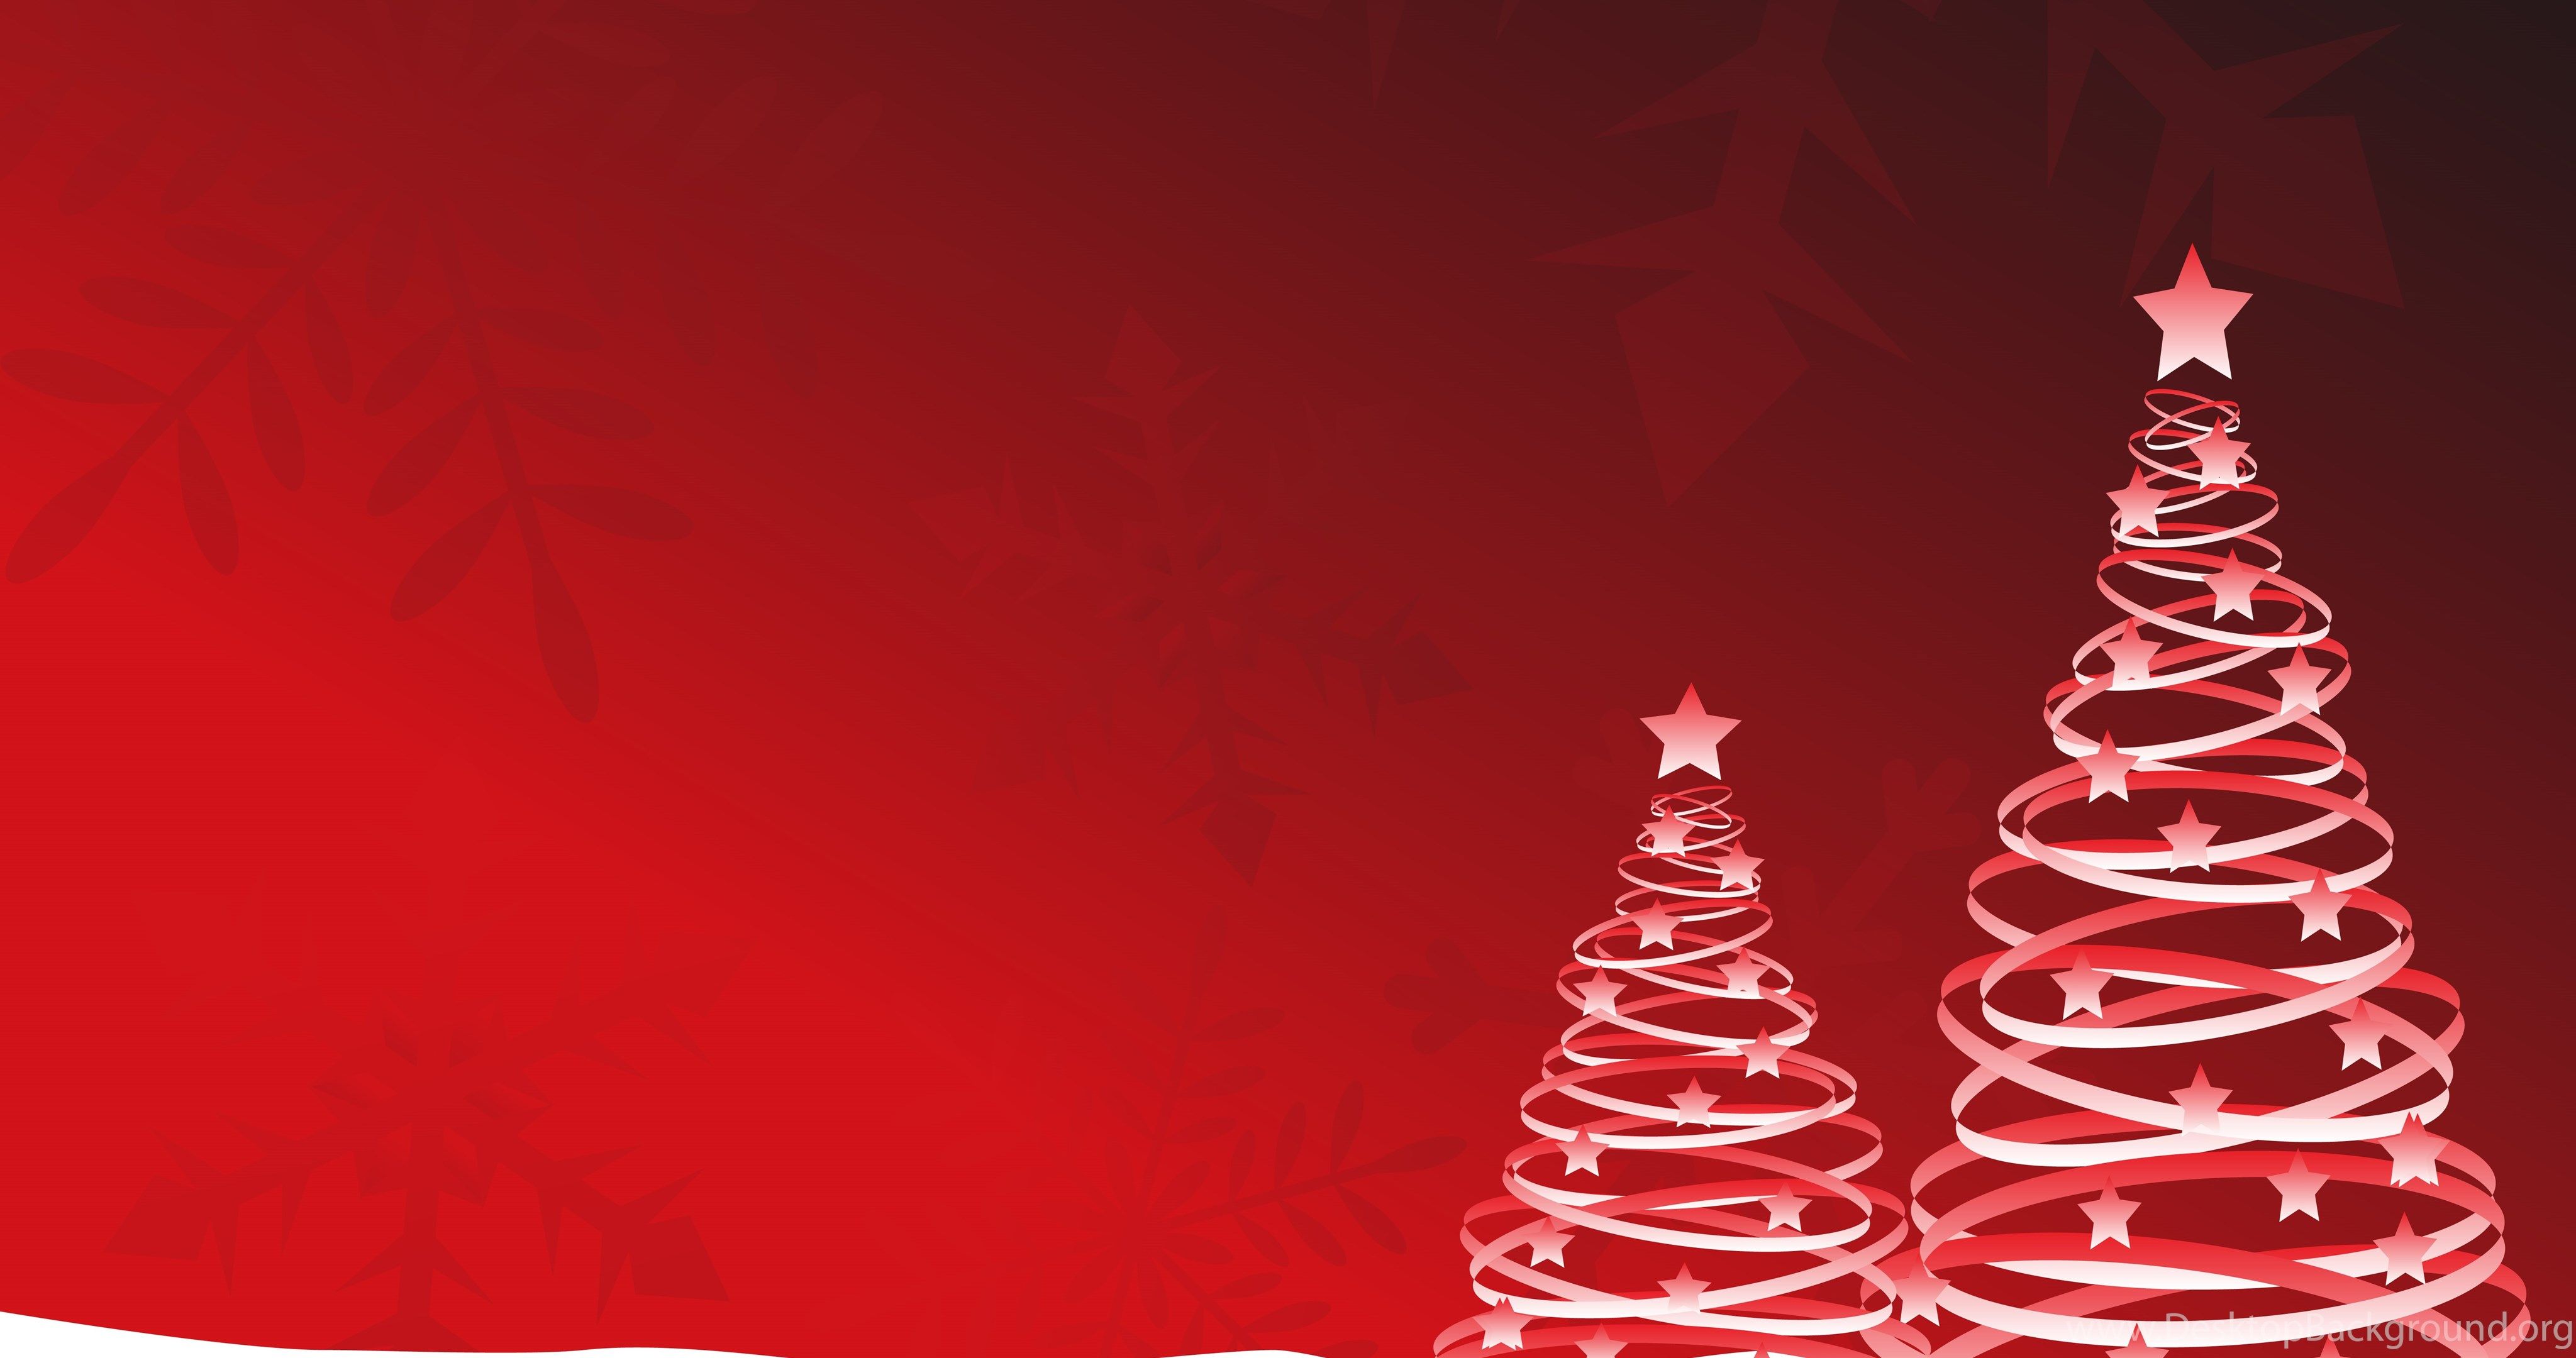 4096x2160 Christmas Wallpapers Wallpaper Cave